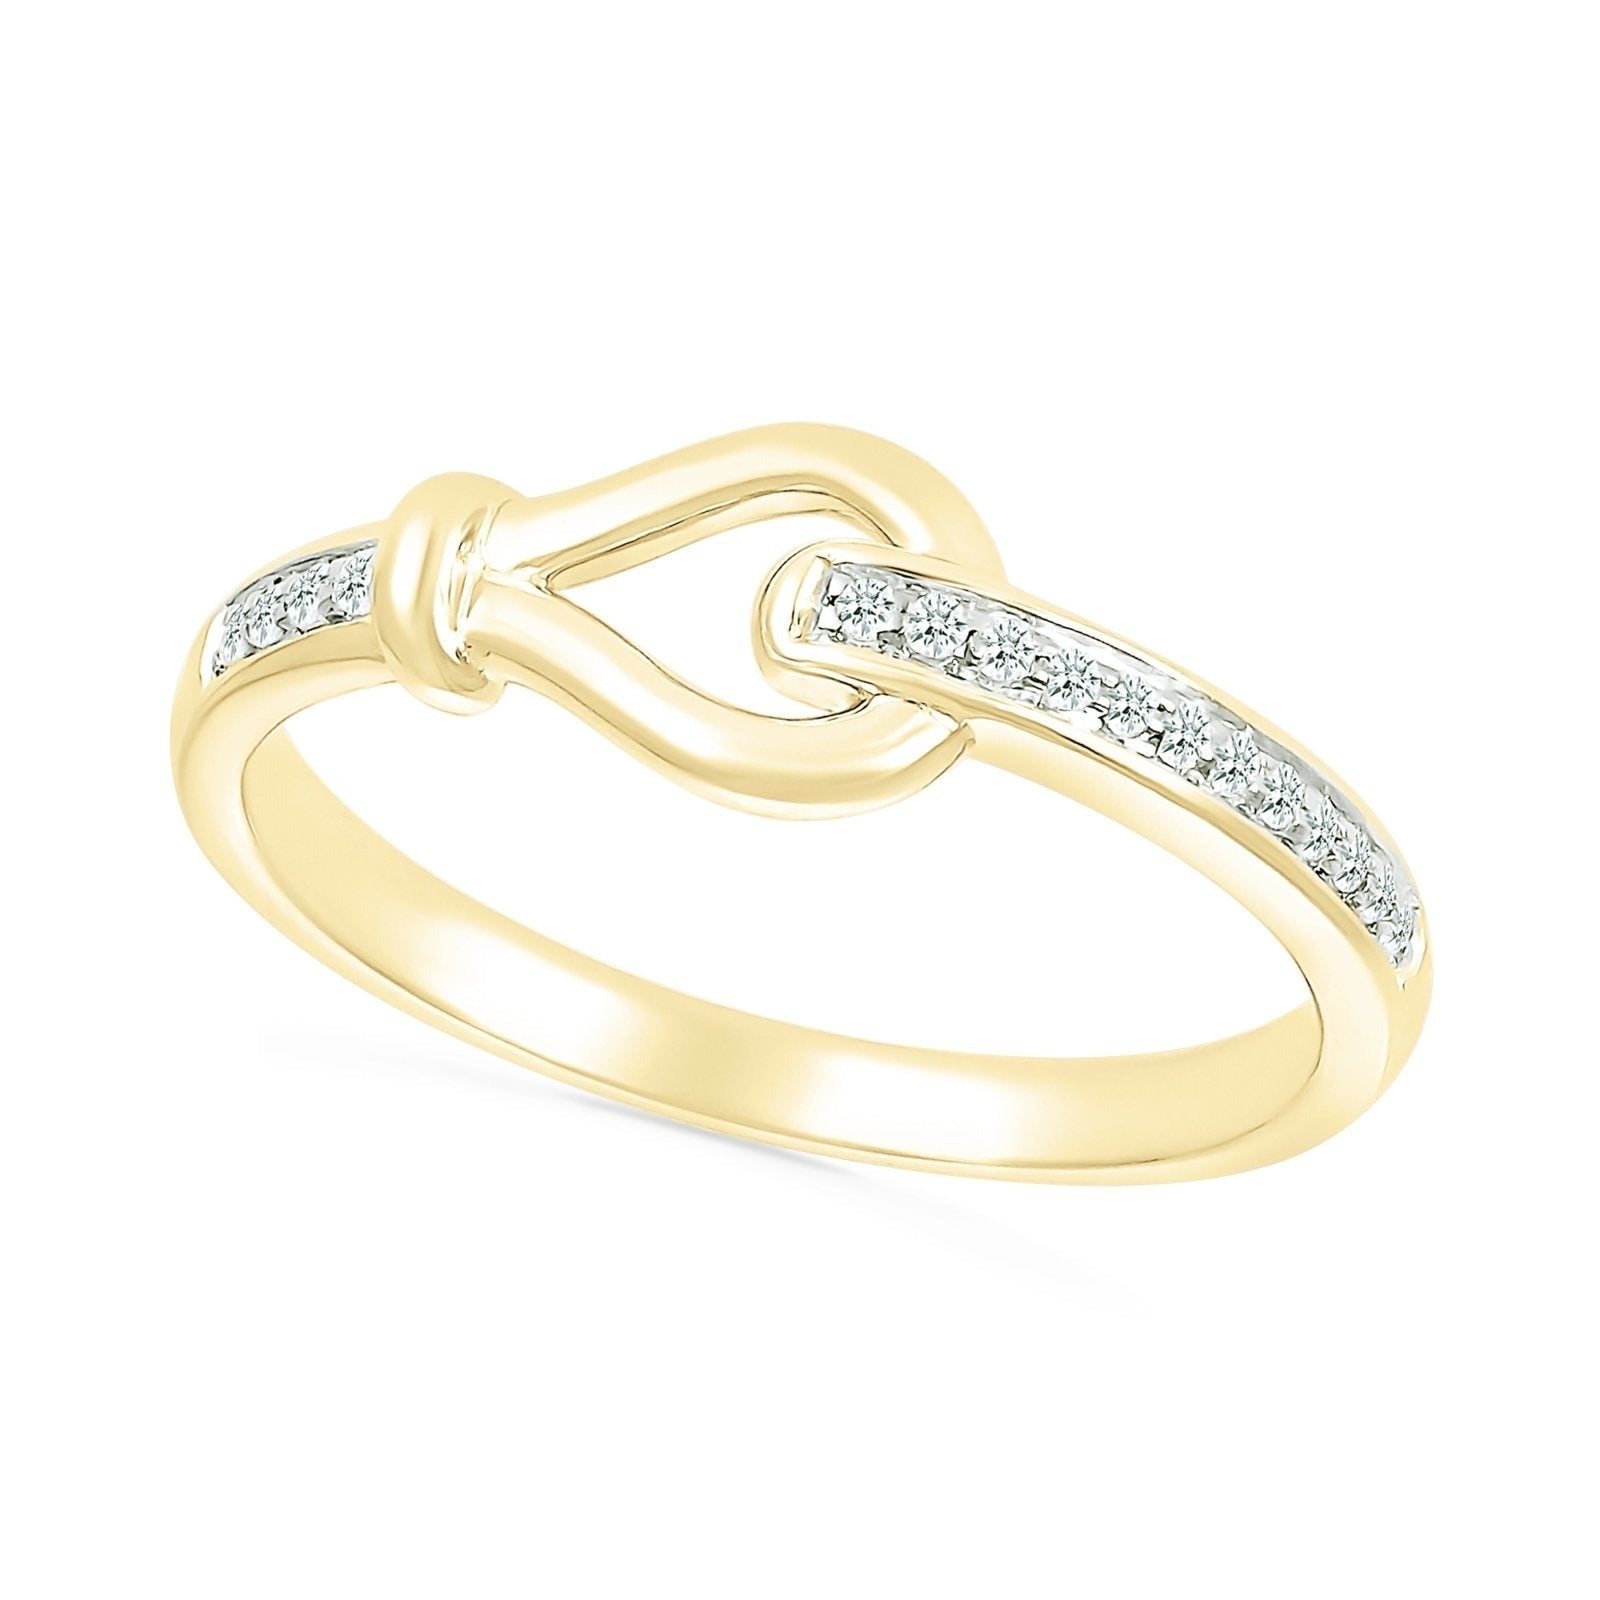 Diamond and Gold Loop Ring Rings Estella Collection #product_description# 32747 Diamond Made to Order Yellow Gold #tag4# #tag5# #tag6# #tag7# #tag8# #tag9# #tag10#